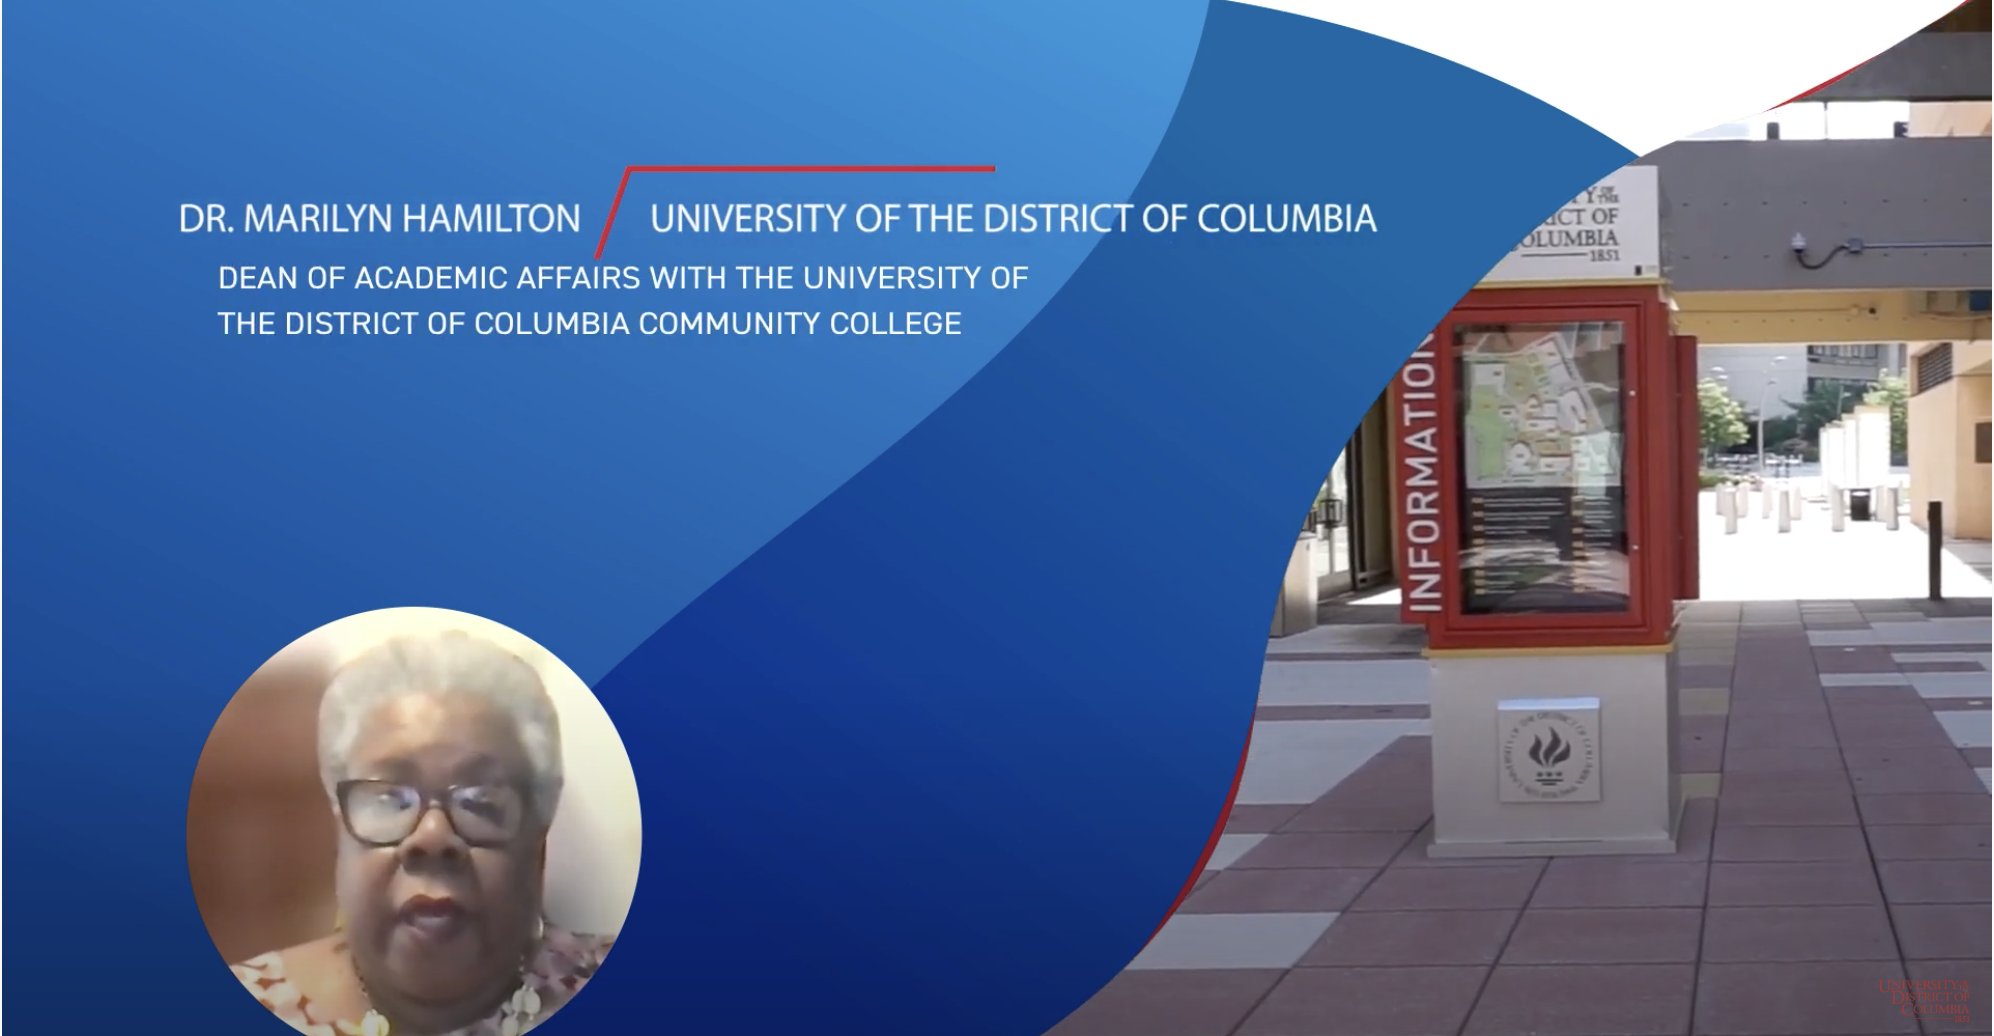 UDC’s Community College was selected as a sub-awardee participant on a grant from the National Science Foundation (NSF) in Quatum Information Systems